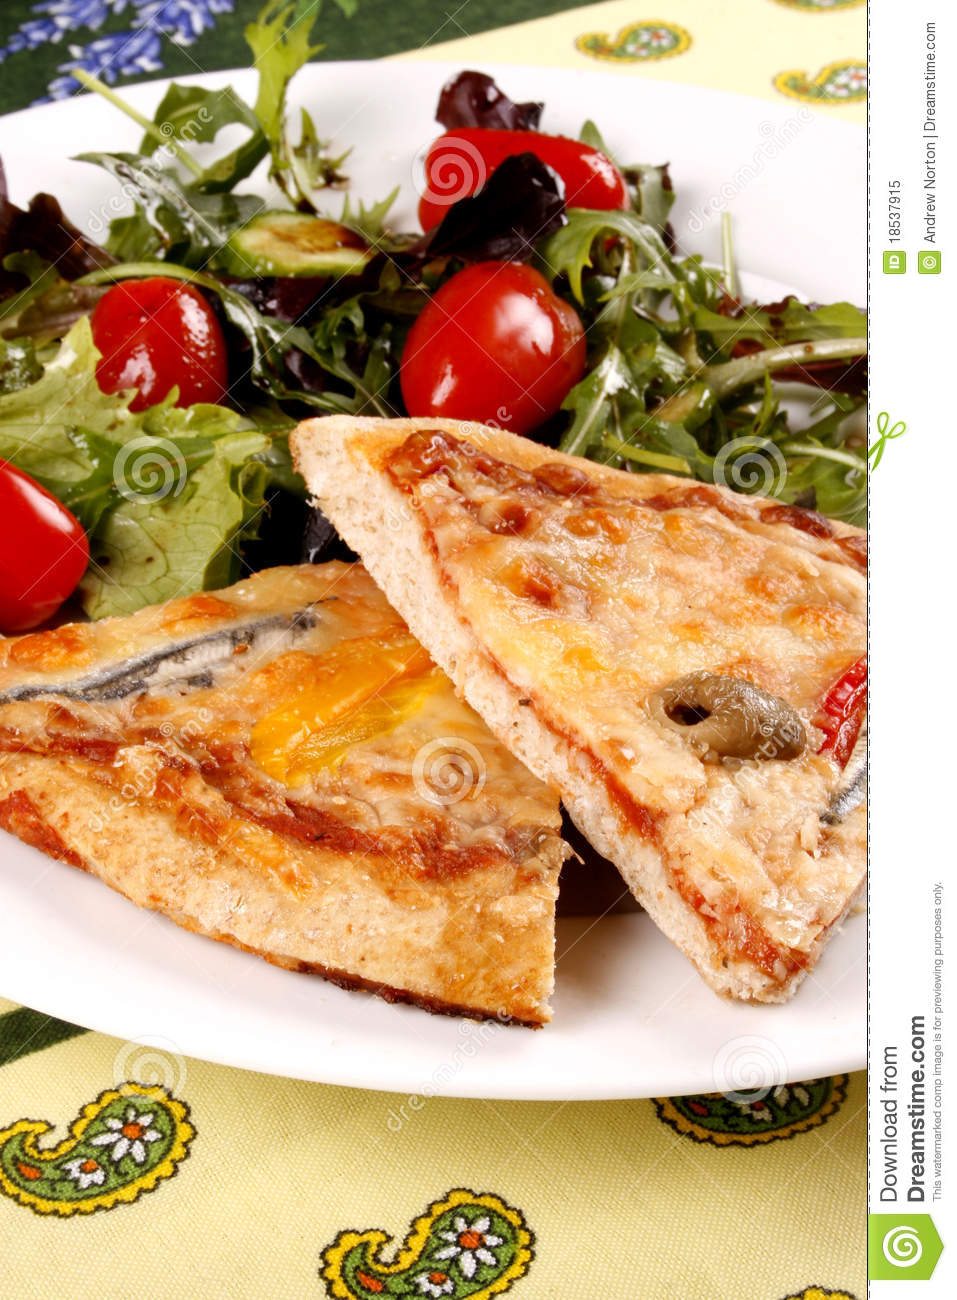 Pizza And Salad Royalty Free Stock Photo   Image  18537915